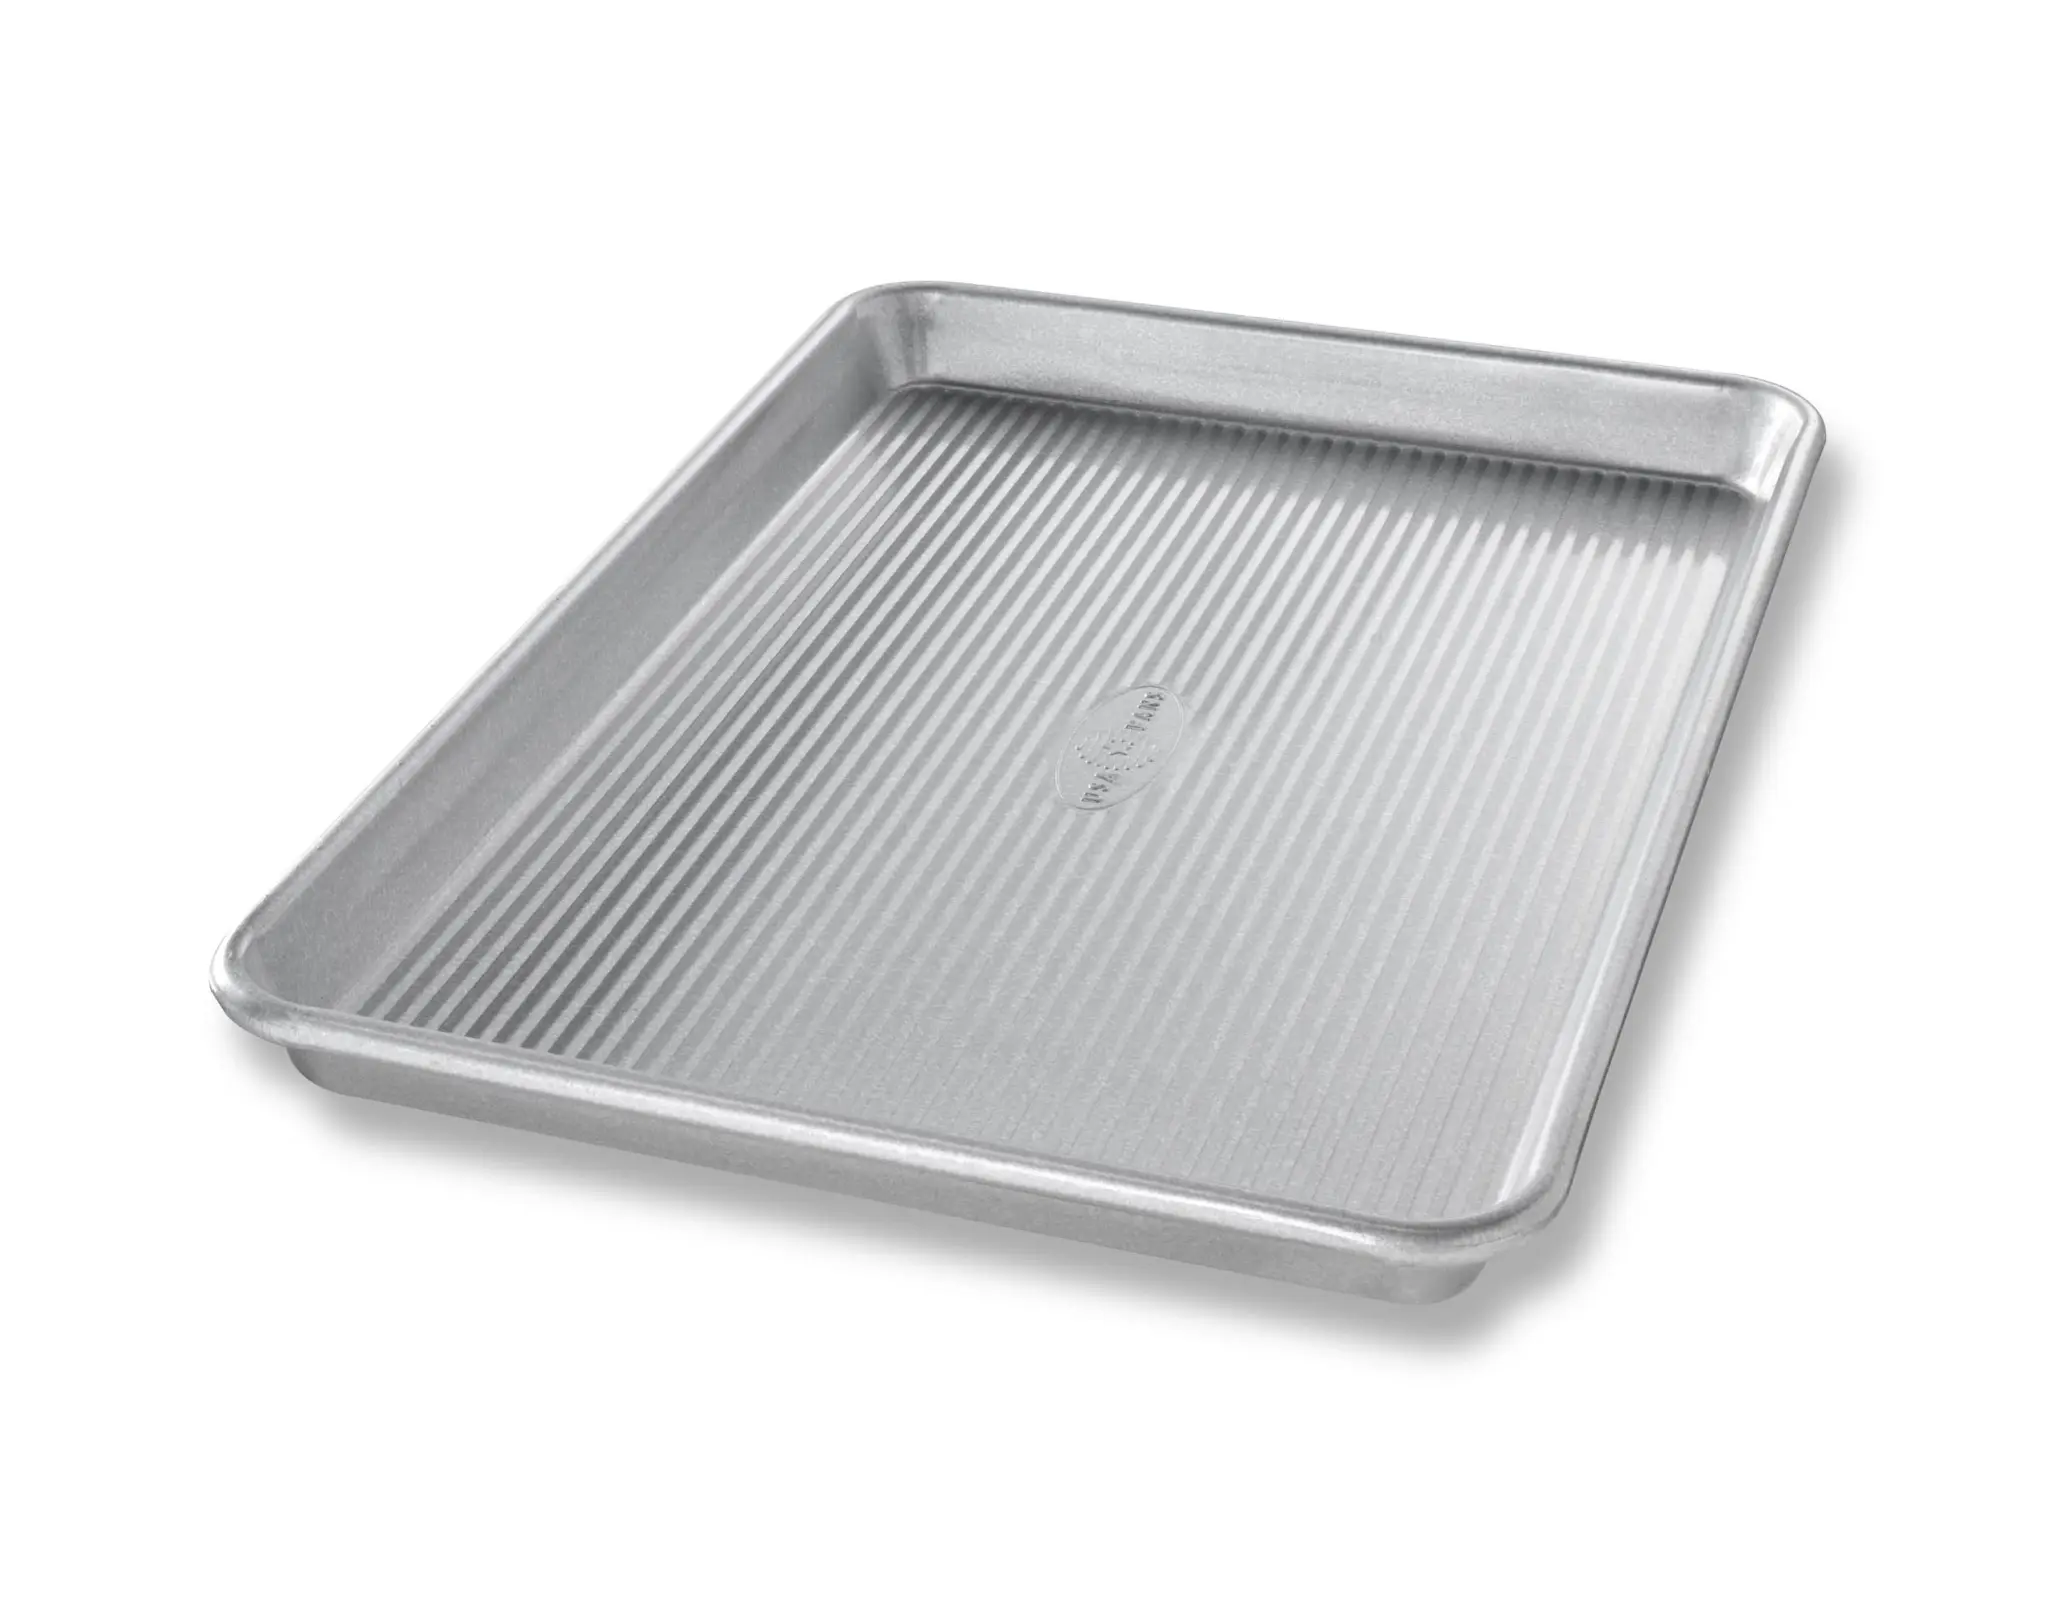 USA Pans Jelly Roll Pan